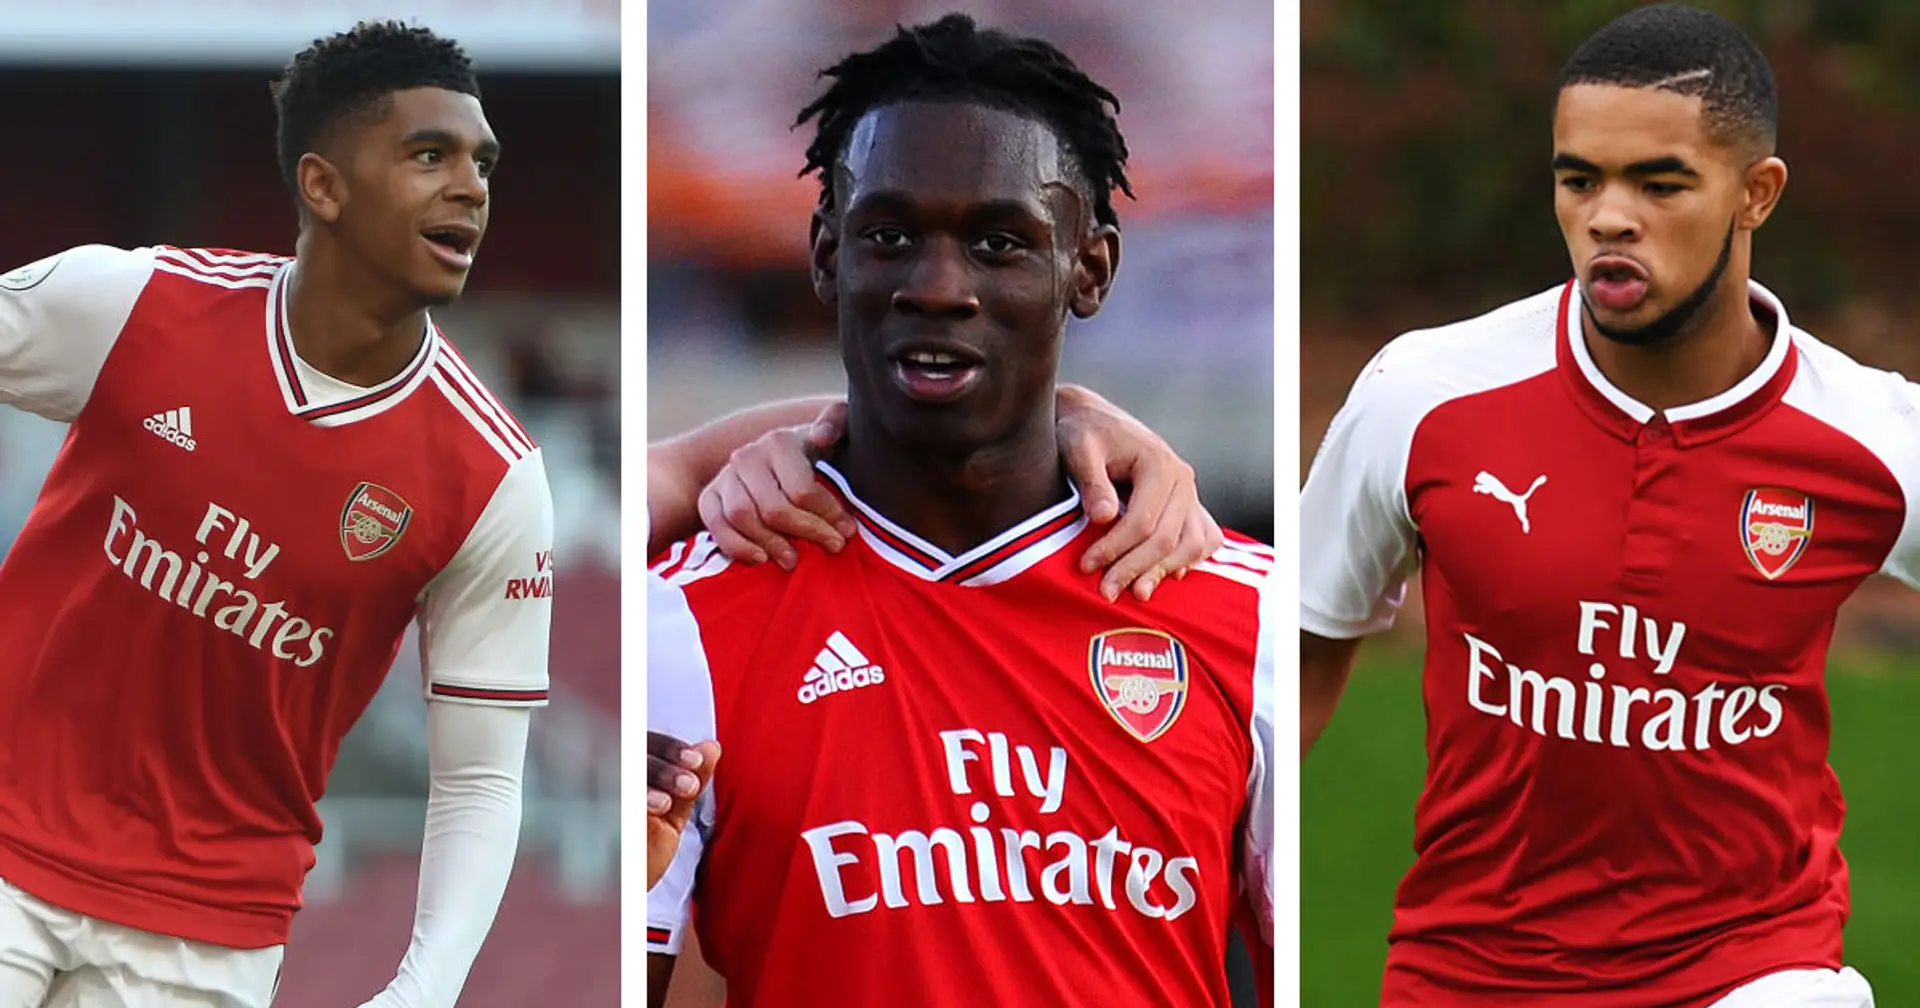 Folarin Balogun all but confirms Arsenal exit: here are 4 other exciting Academy forwards